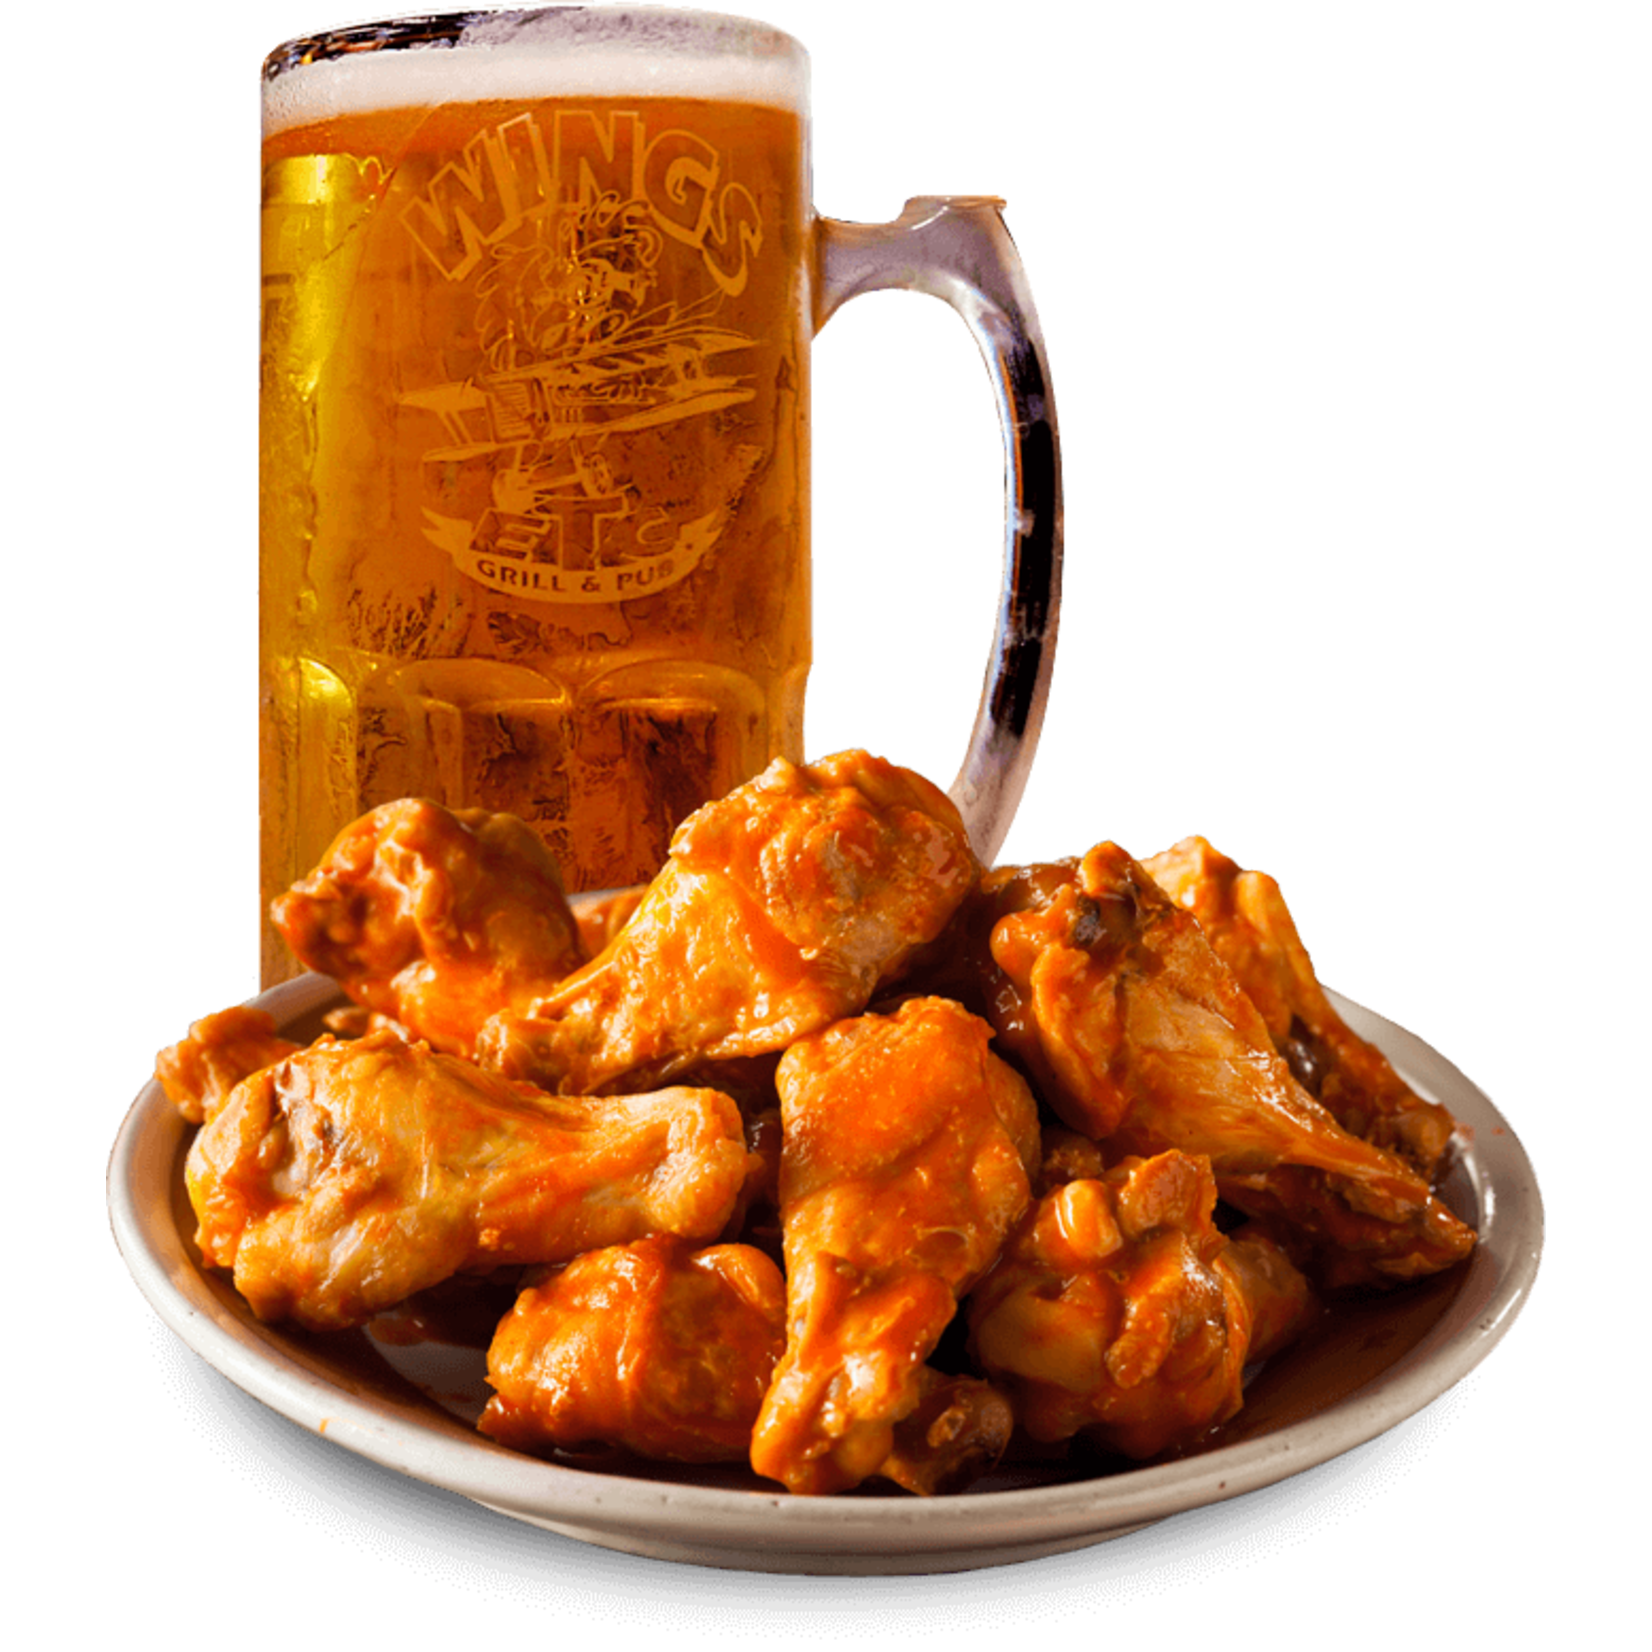 Wings Etc Grill & Pub-Yorkville Wings Etc Grill & Pub-Yorkville $25.00 Dining Certificate